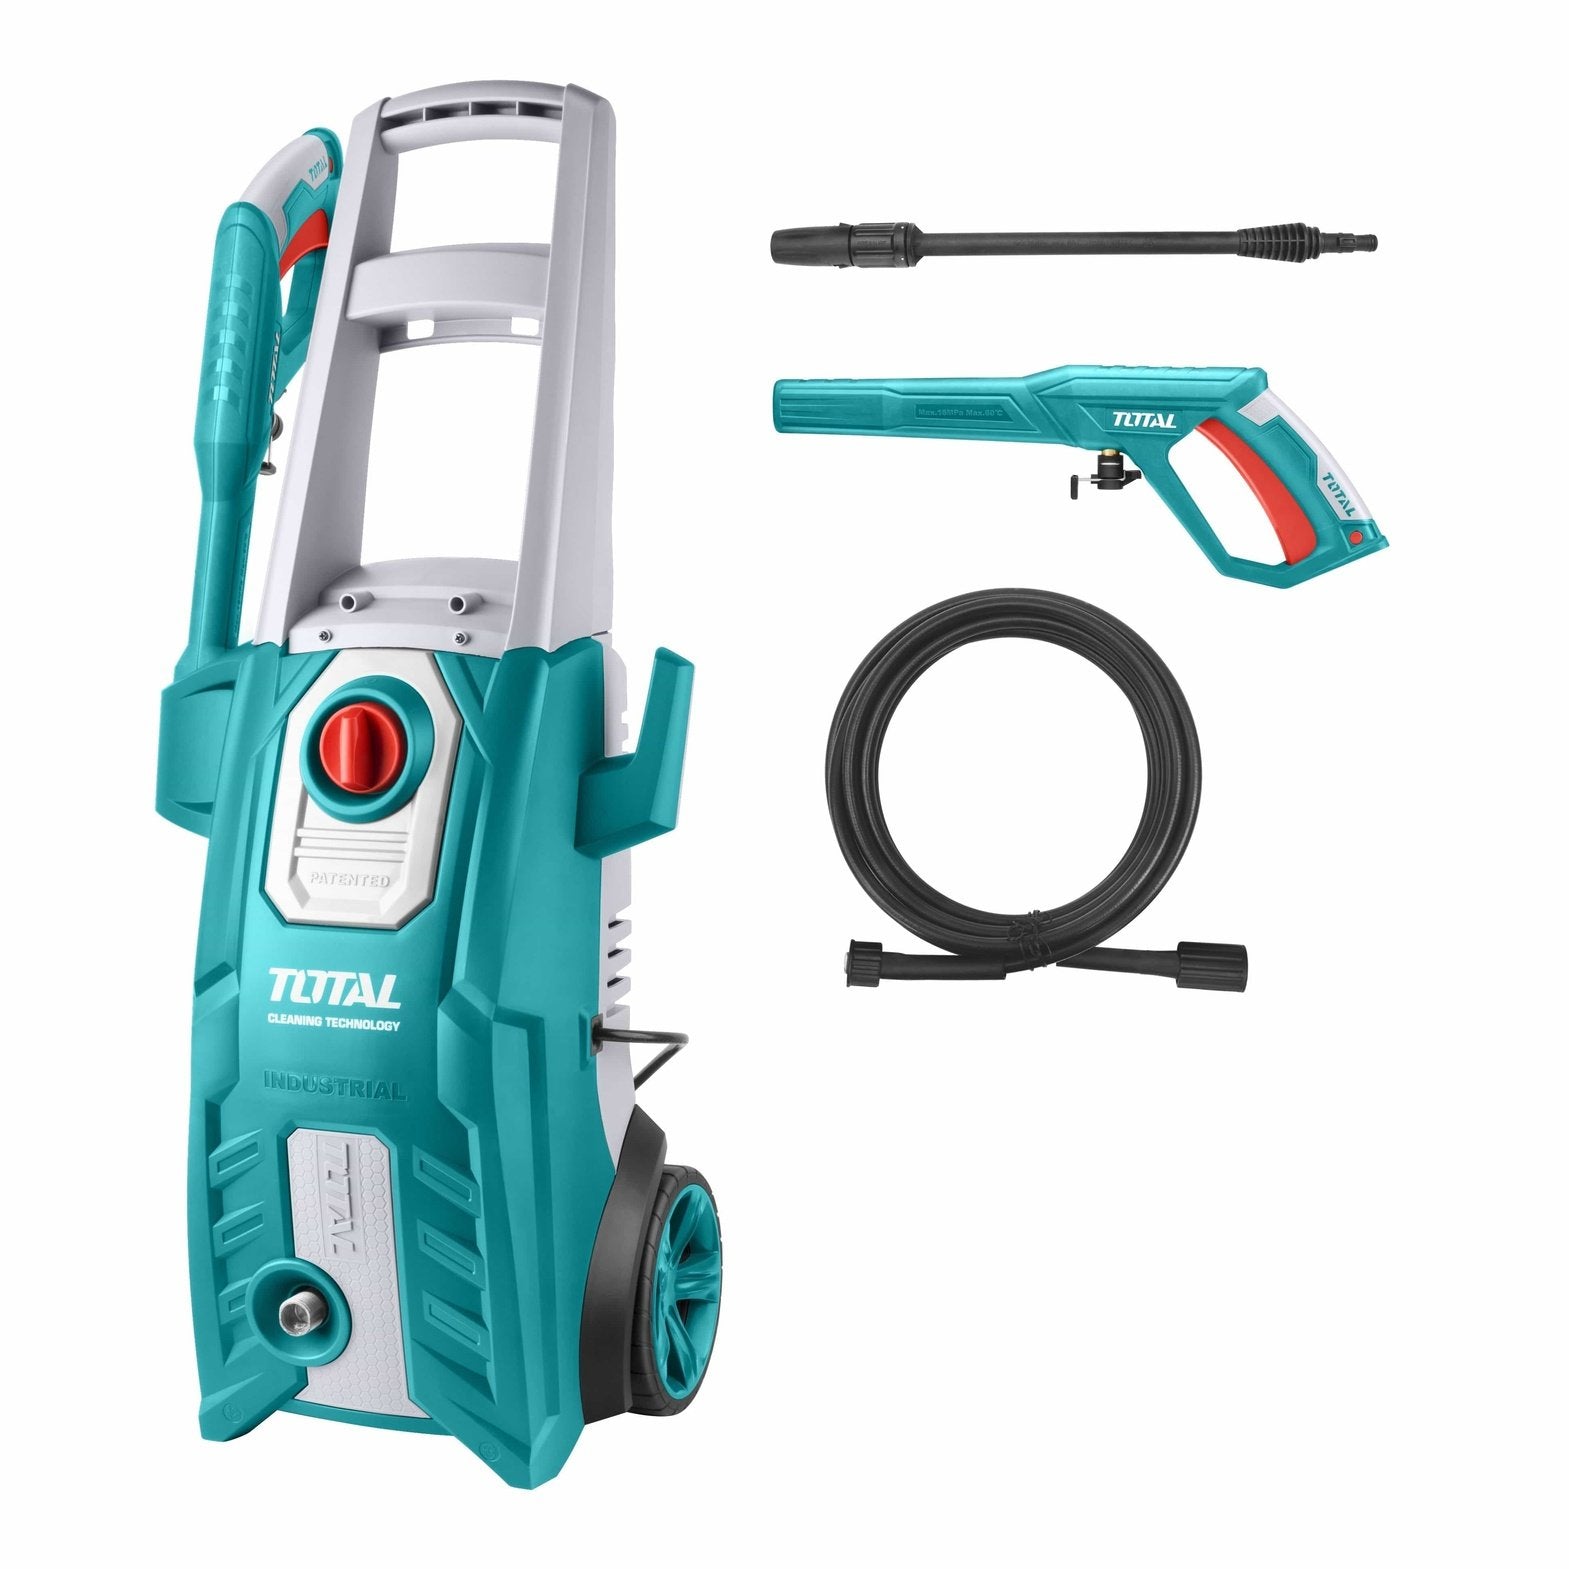 Total High Pressure Washer 1800W 150Bar - TGT11356 | Supply Master | Accra, Ghana Tools Building Steel Engineering Hardware tool